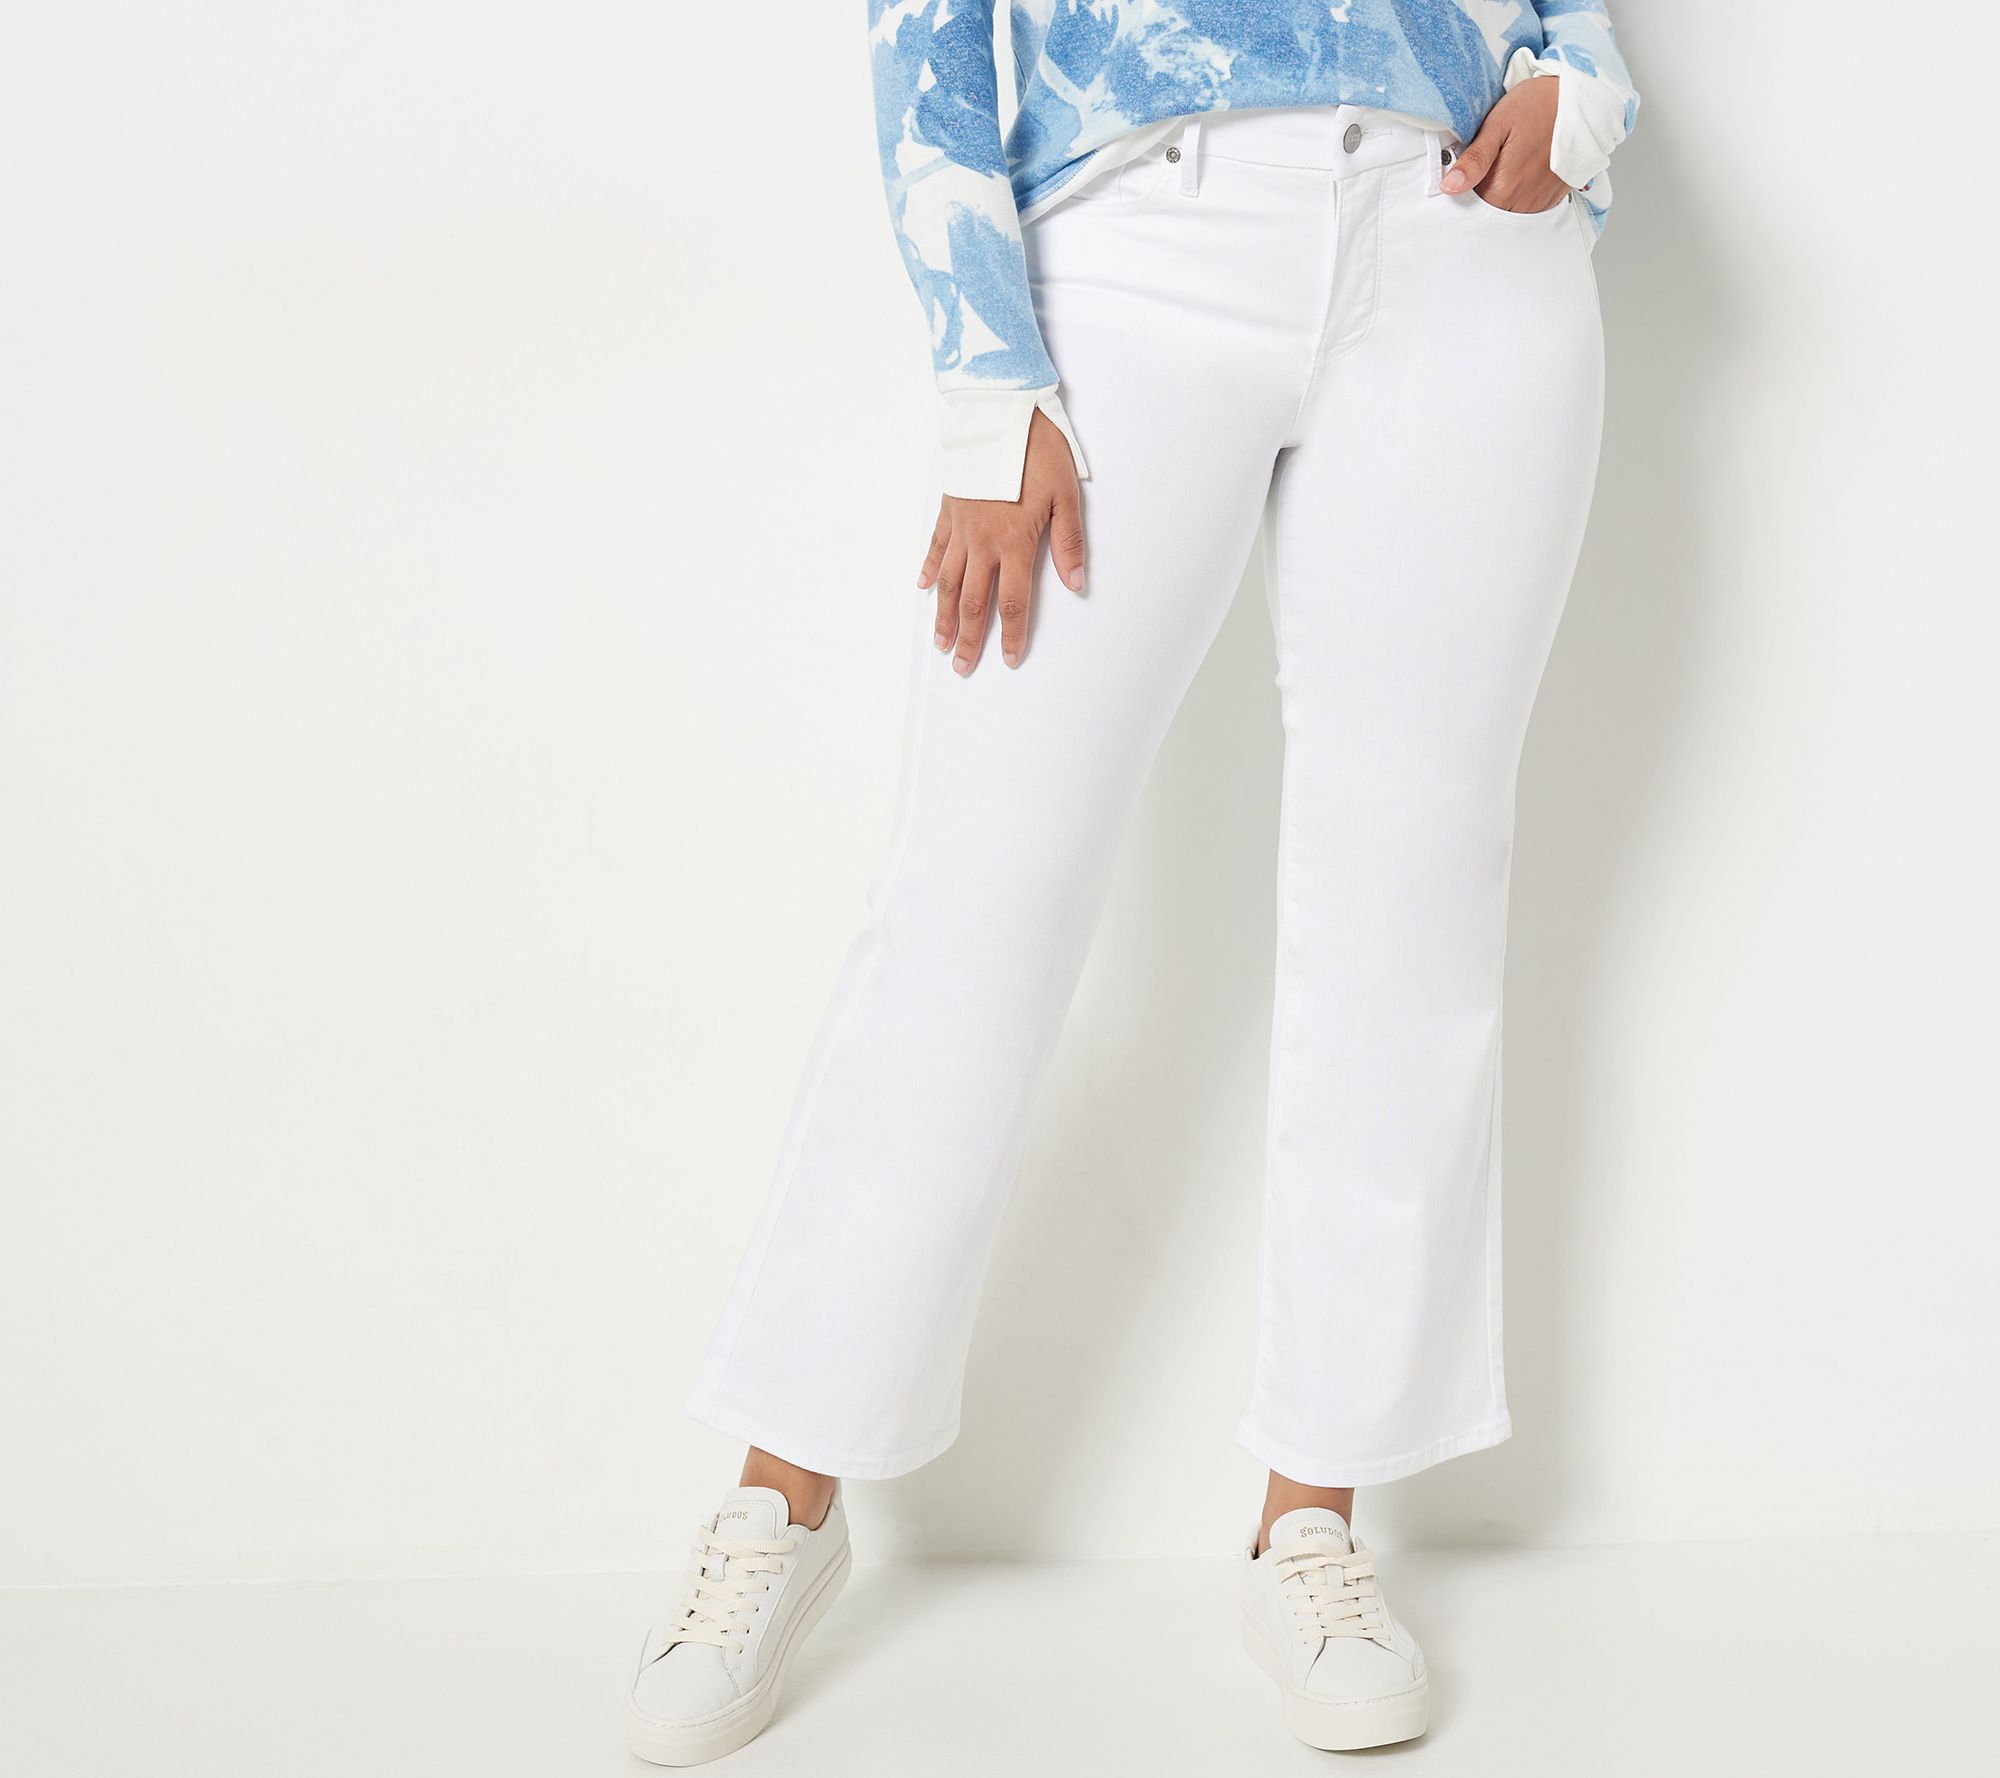 NYDJ Patchie Waist Match Relaxed Flare Ankle Jeans- Optic White - QVC.com